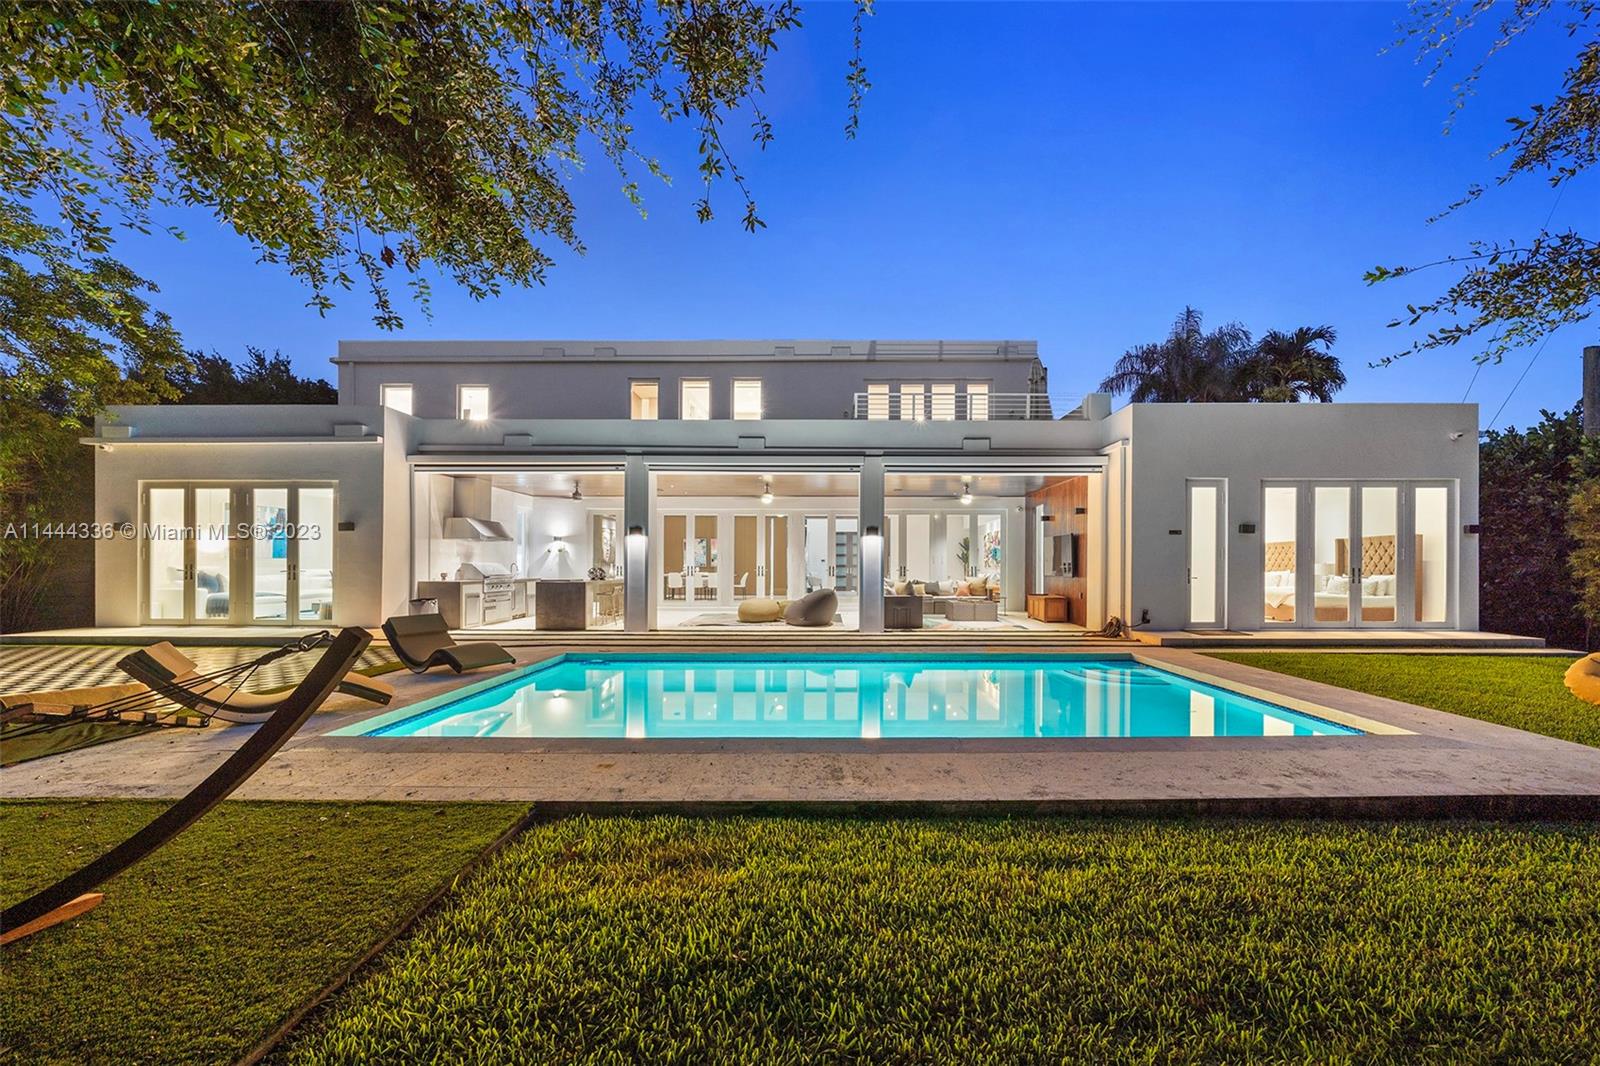 Absolutely Gorgeous modern home, centrally located and minutes to the Grove, Gables and Downtown. Huge backyard for kids and entertaining, high ceilings media room, Sonos system thru-out, 1/2 basketball court, equipped gym, giant family room and plenty of parking. Call listing agent for appt/exclusive showings